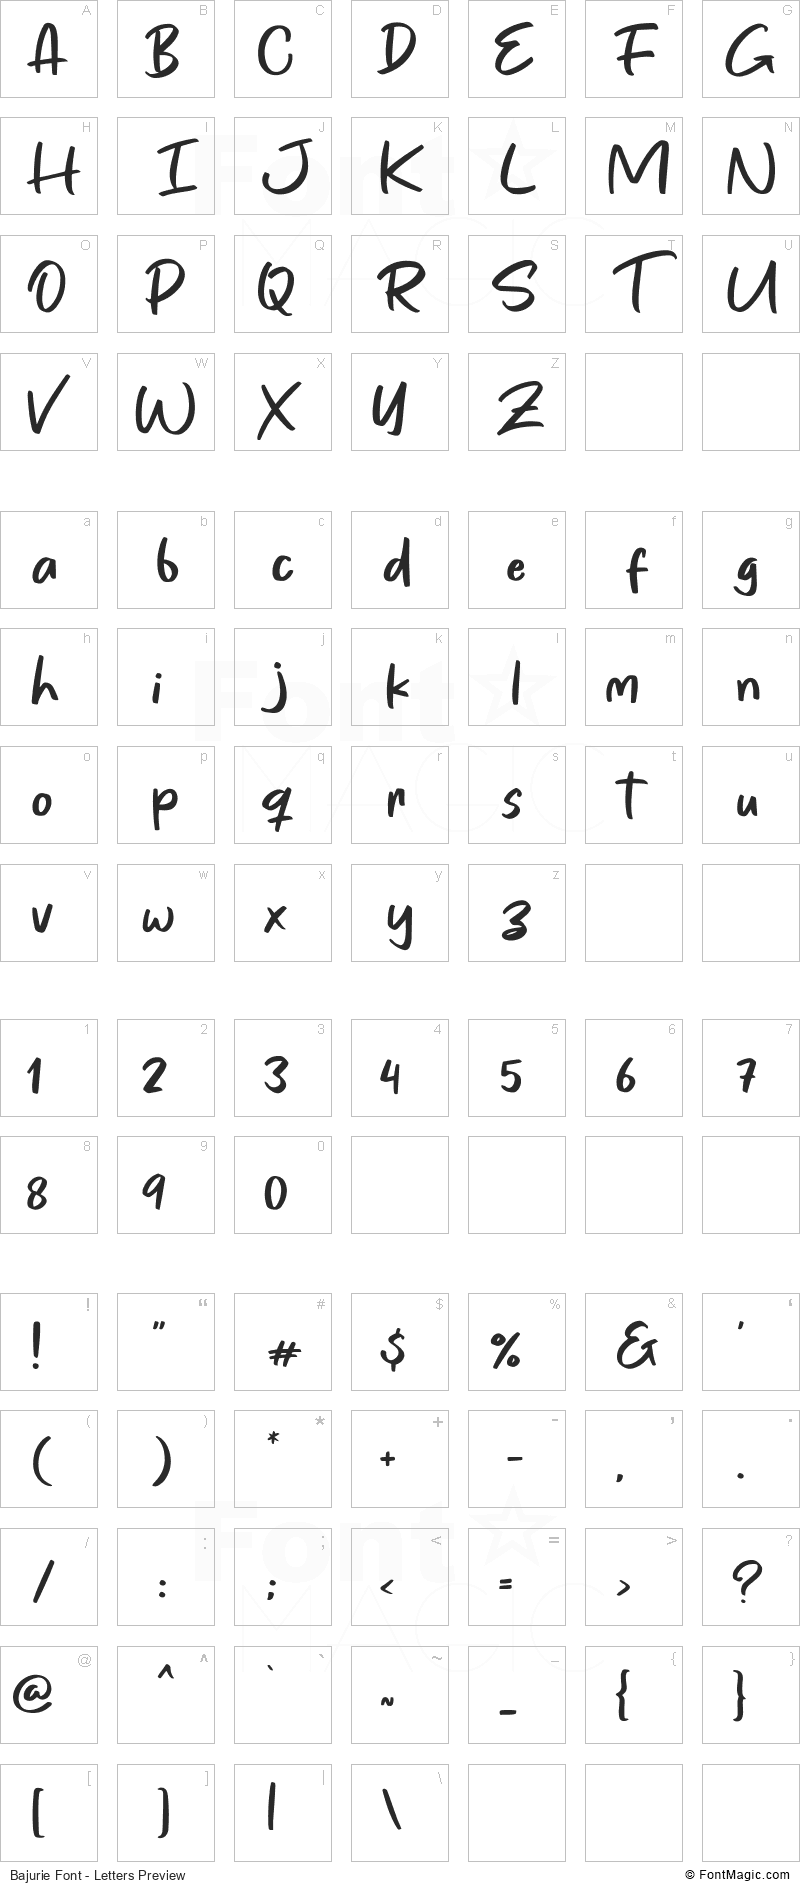 Bajurie Font - All Latters Preview Chart